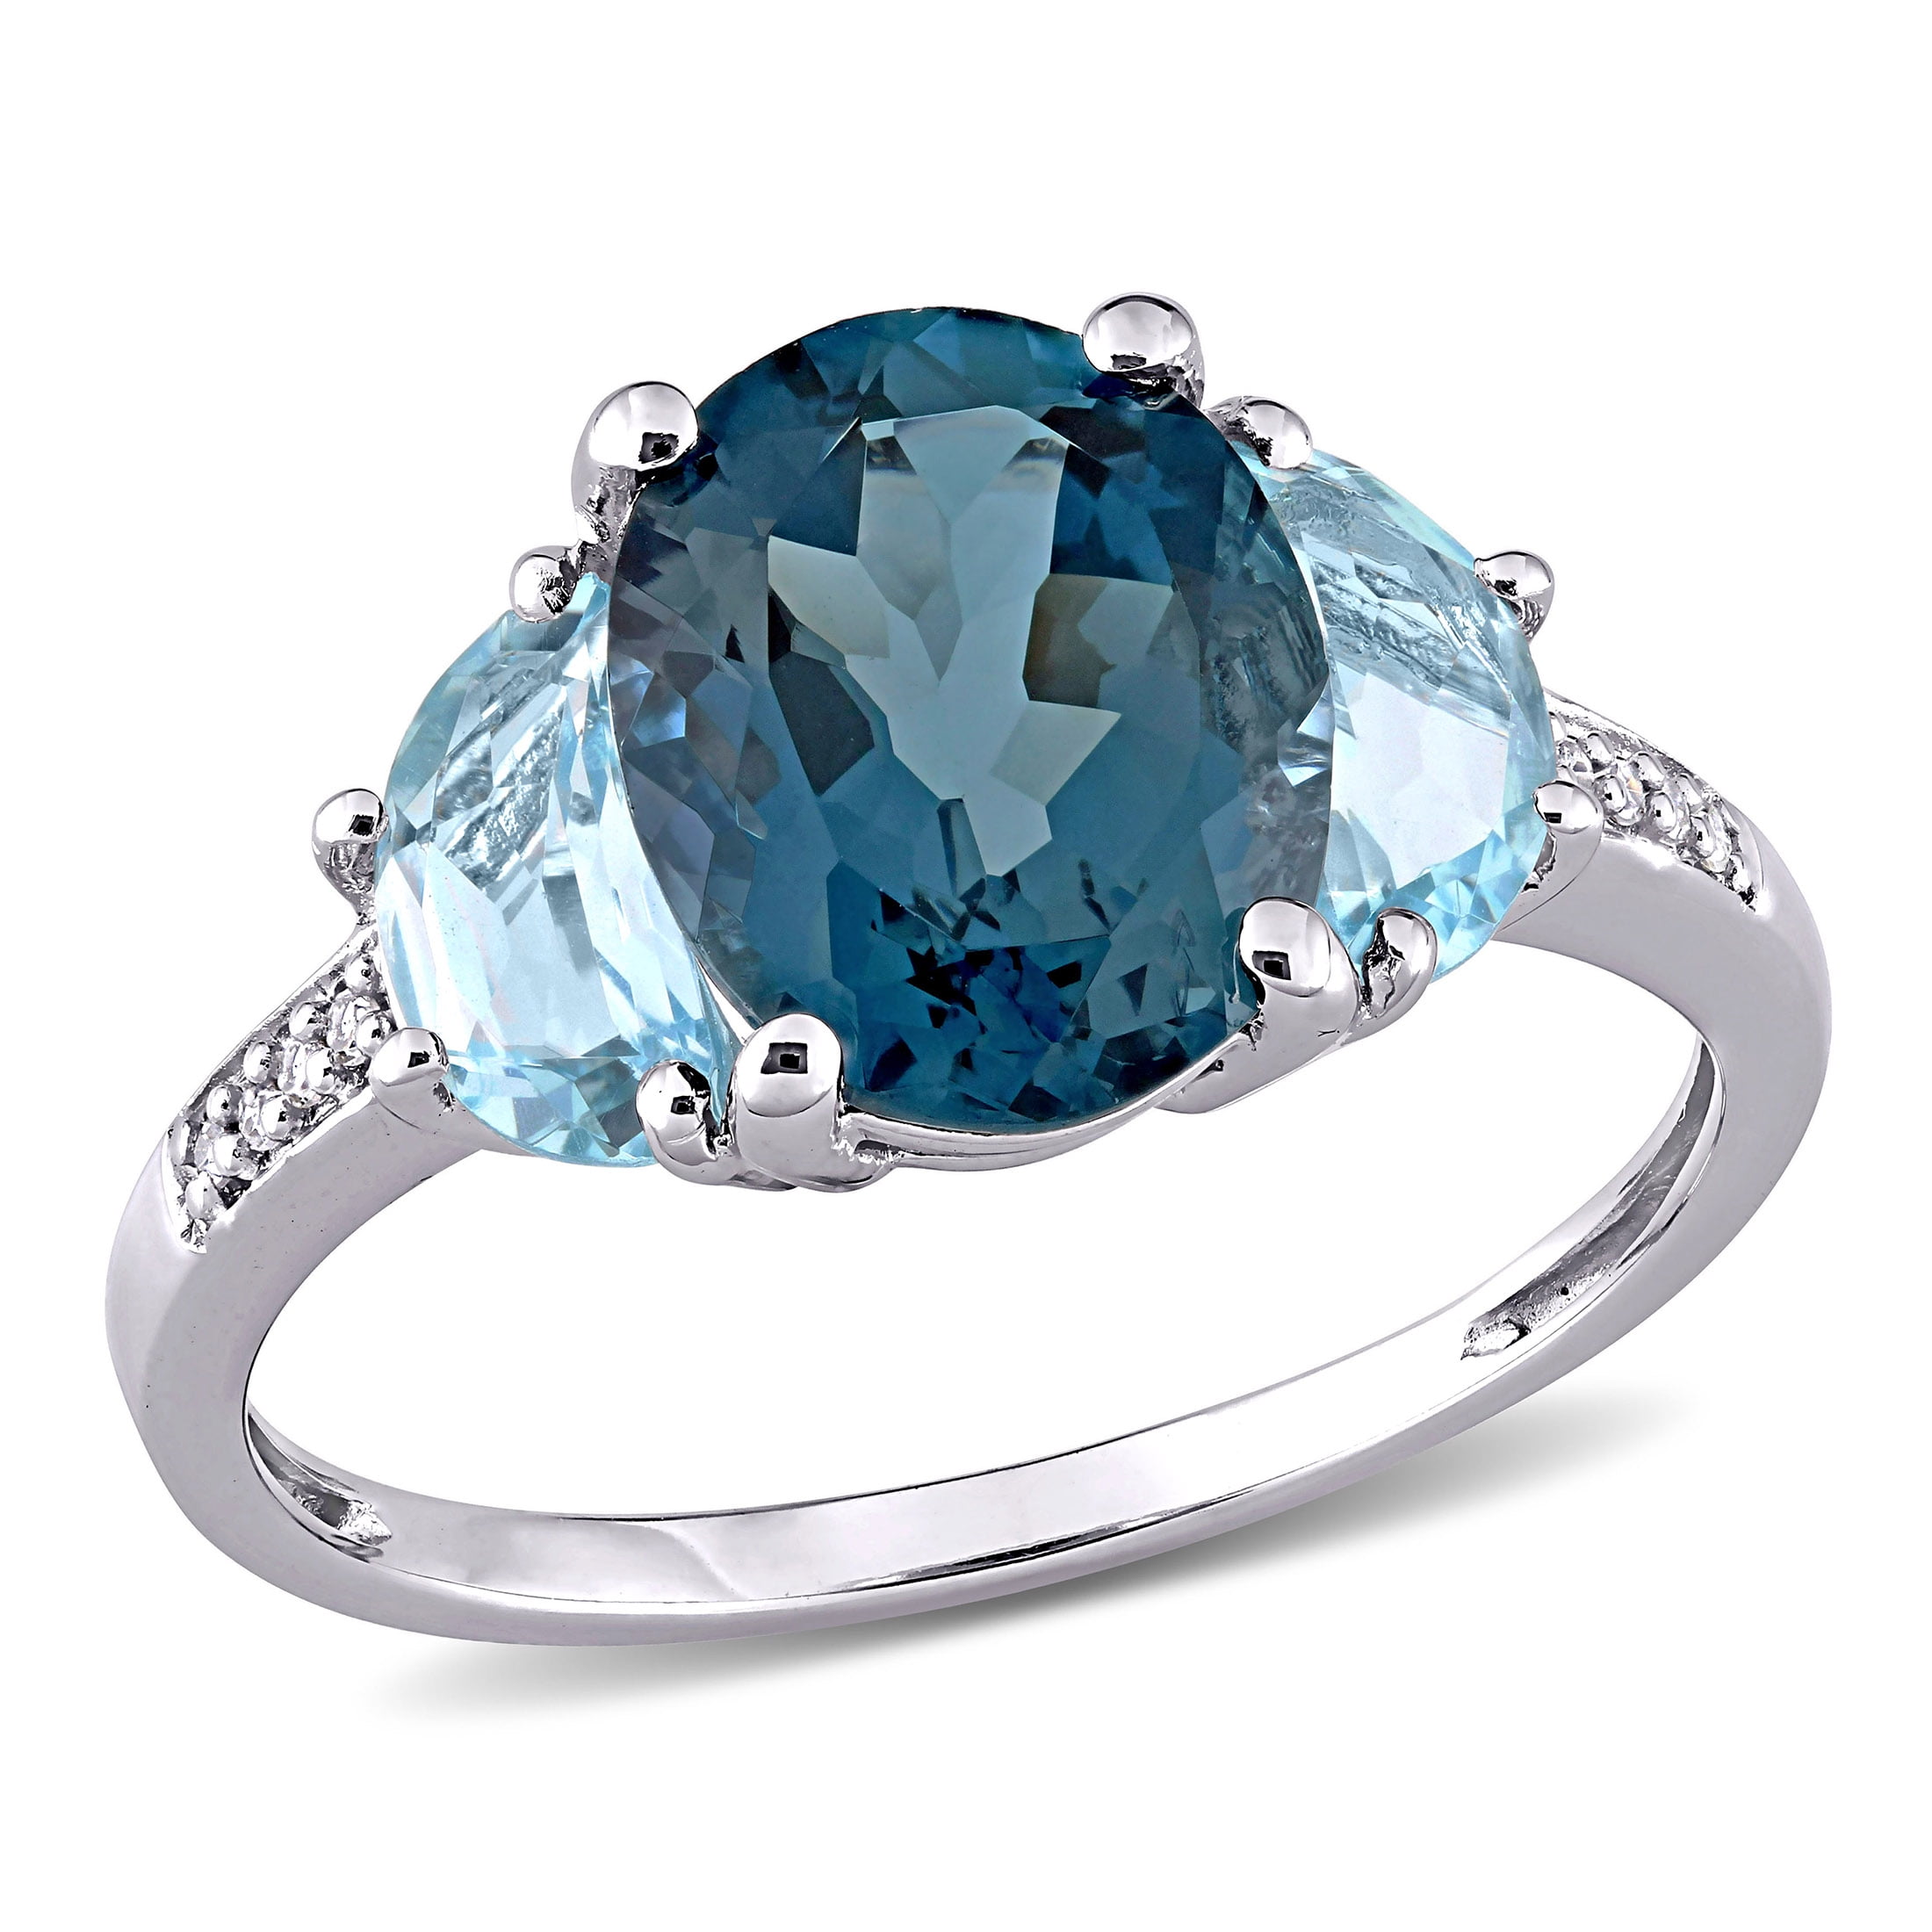 55Carat Natural Blue Topaz Silver Ring for Men 3 Carat Oval Birthstone Size  4,5,6,7,8,9,10,11,12,13|Amazon.com